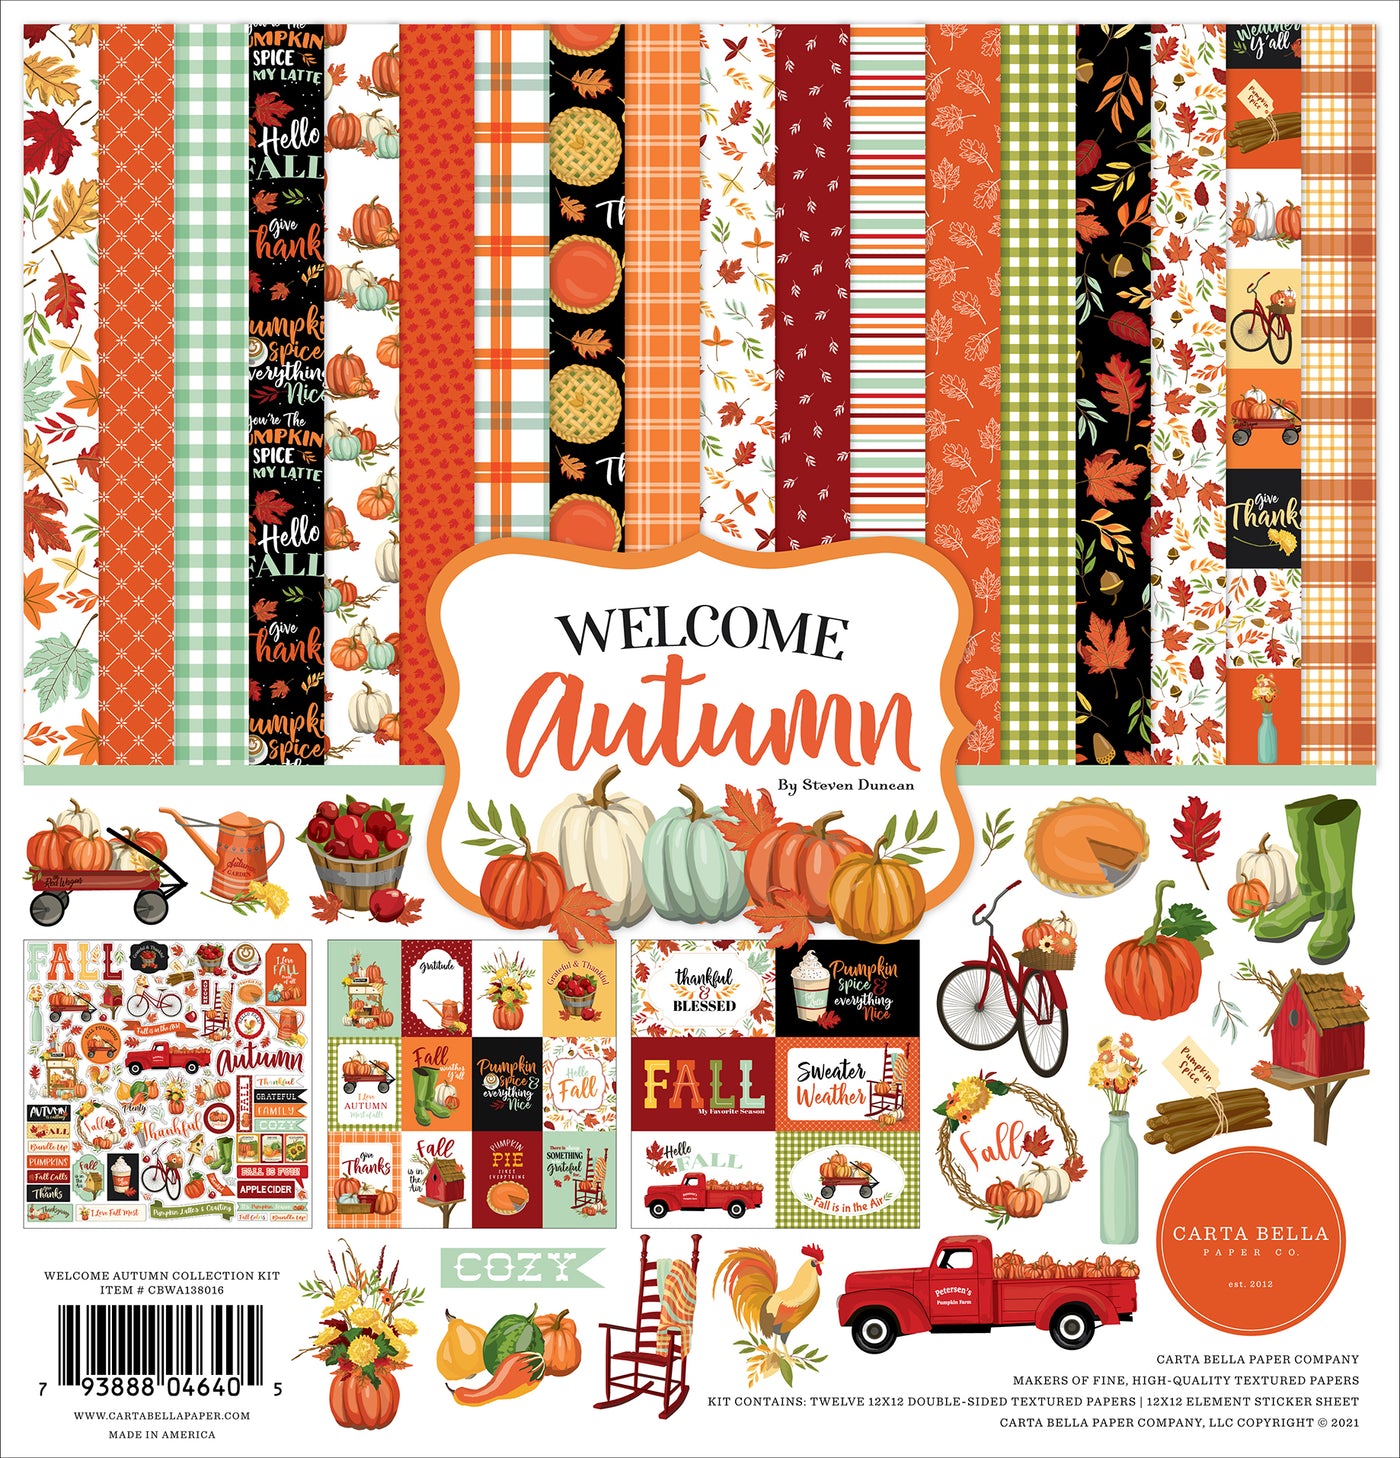 This Collection Kit is part of the Welcome Autumn Collection designed by Steven Duncan for Carta Bella Paper. The sticker sheet consists of a cute red truck, words, and phrases, banners, tags, bikes, a wagon full of pumpkins, other fall fruits, vegetables, etc. You will be able to create cards and other projects with the papers and then add the stickers as embellishments and focal points, so many options with this kit. 